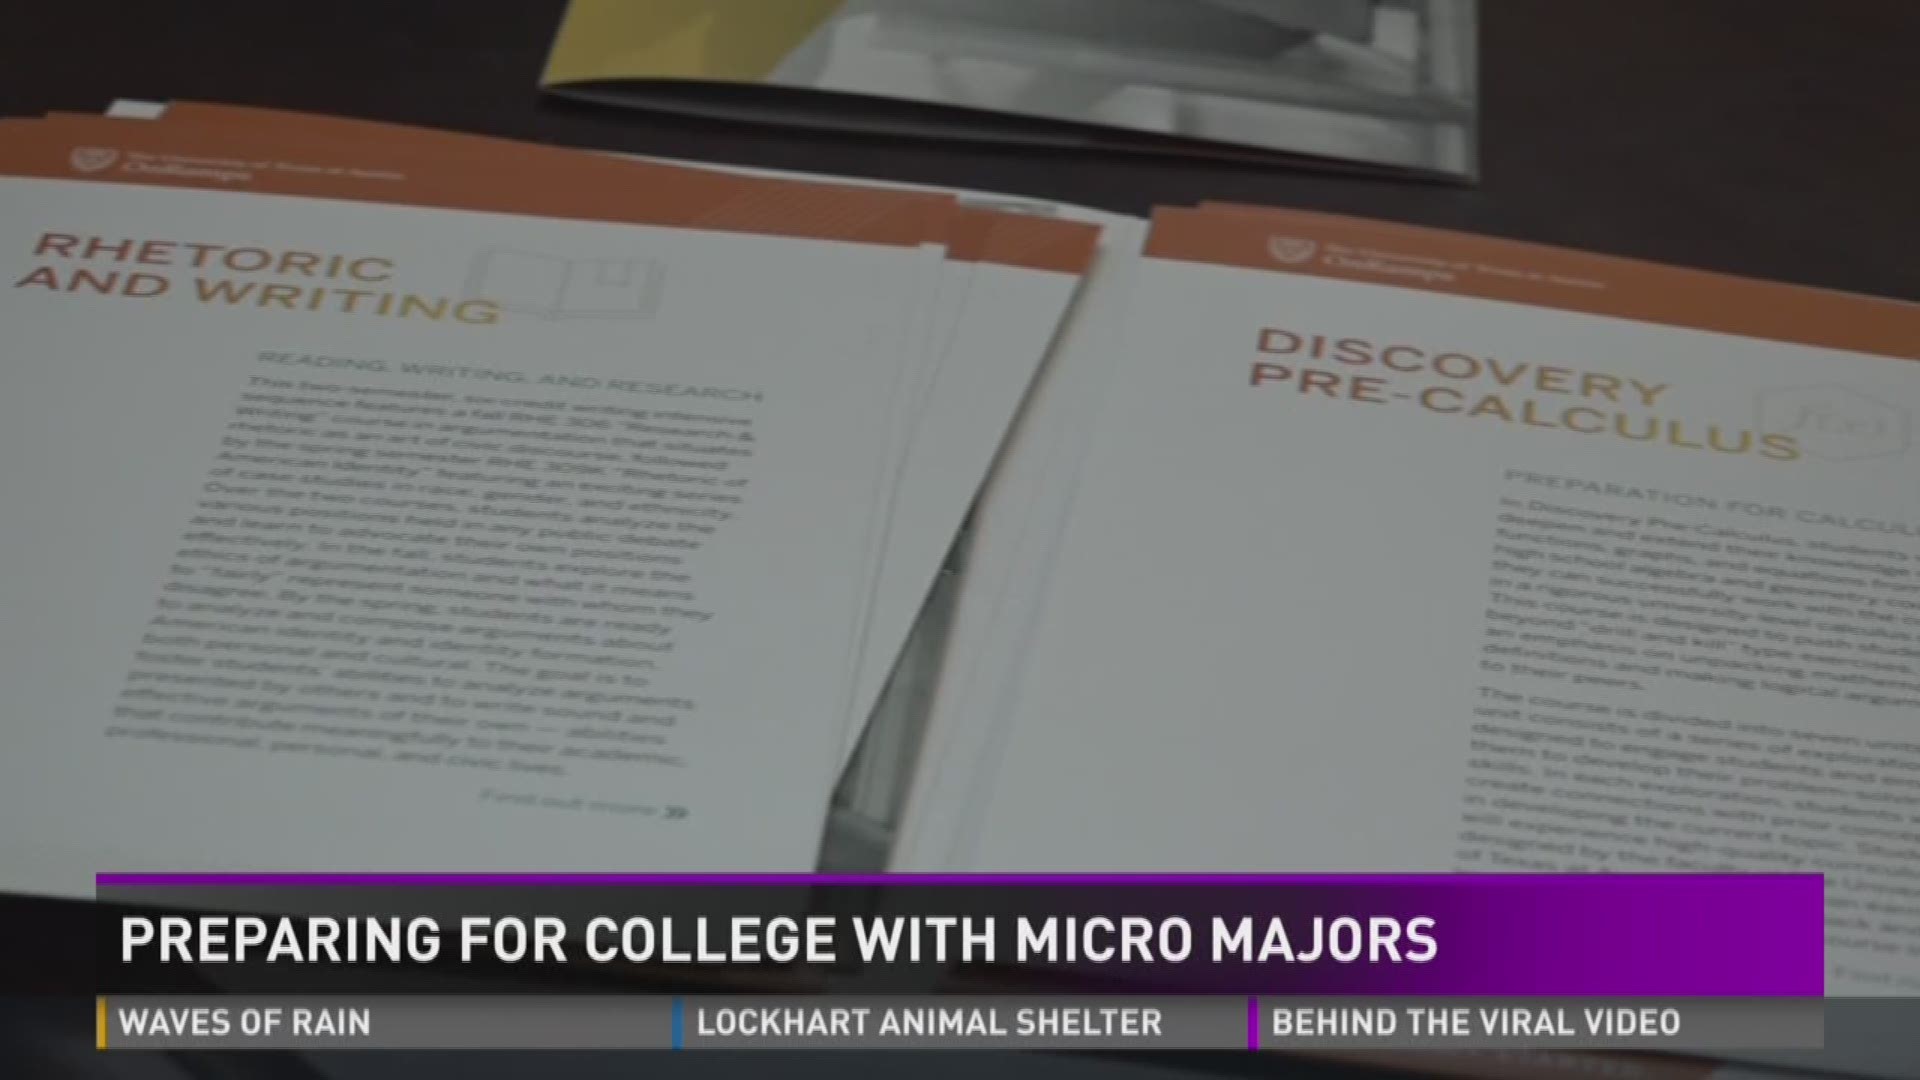 Preparing for college with micro majors